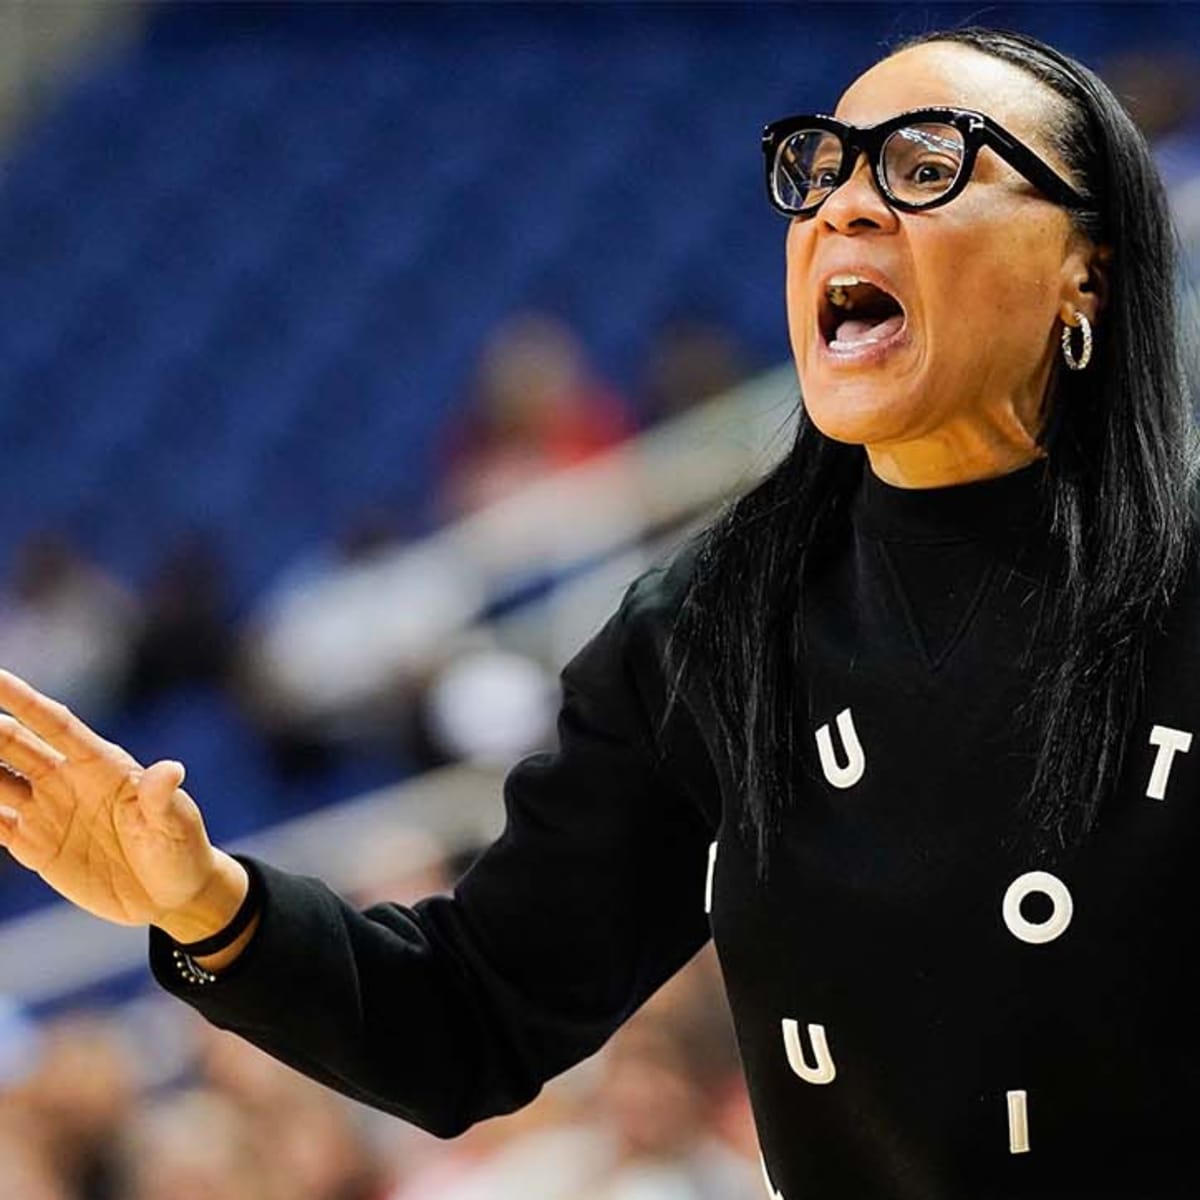 Dawn Staley Contract Details at South Carolina - Boardroom